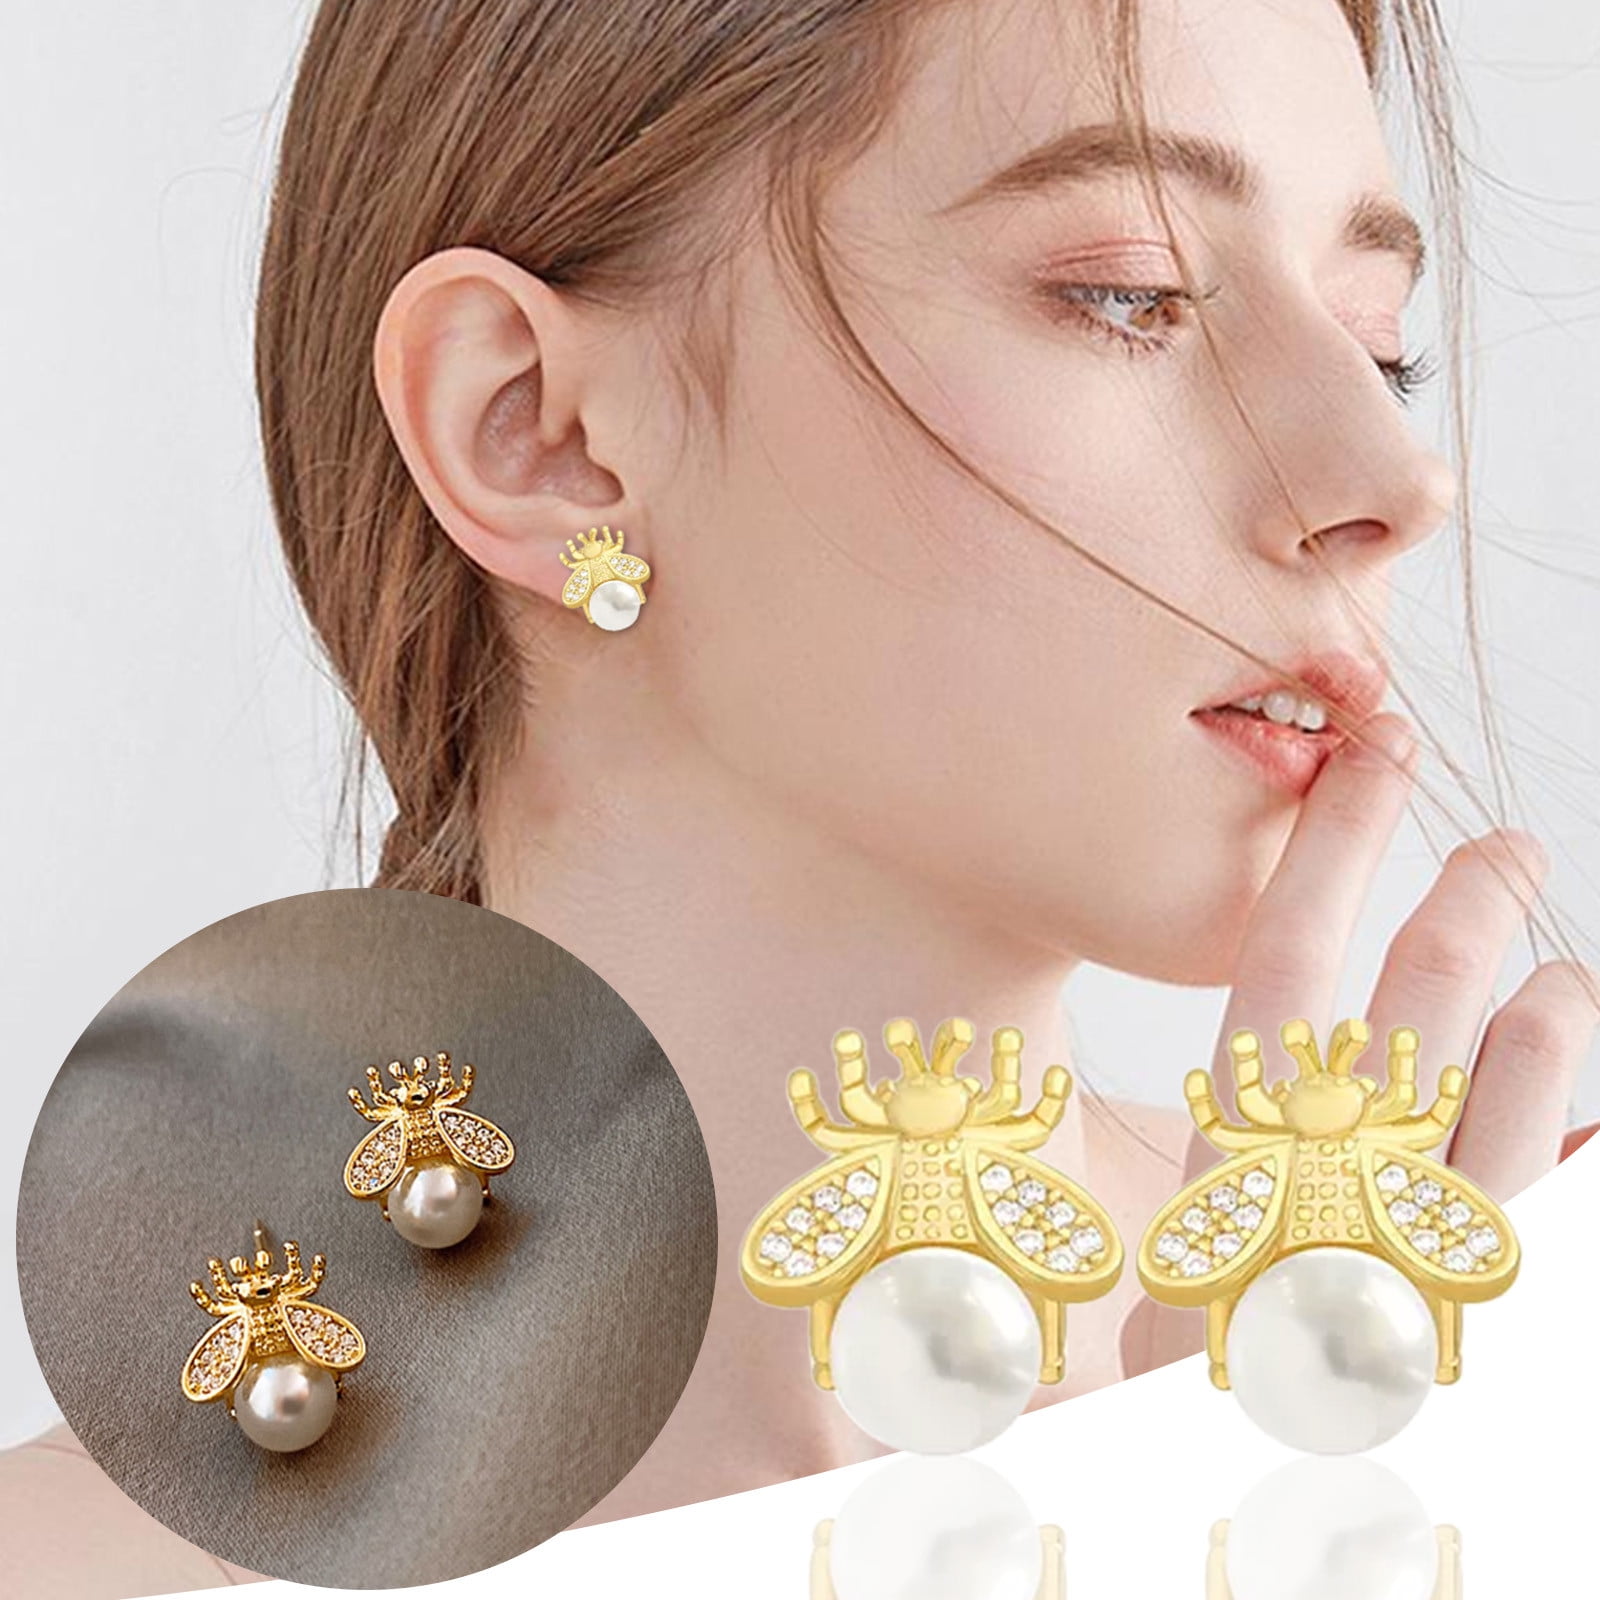 Buy daily wear gold earrings | Top gold earrings designs for daily use